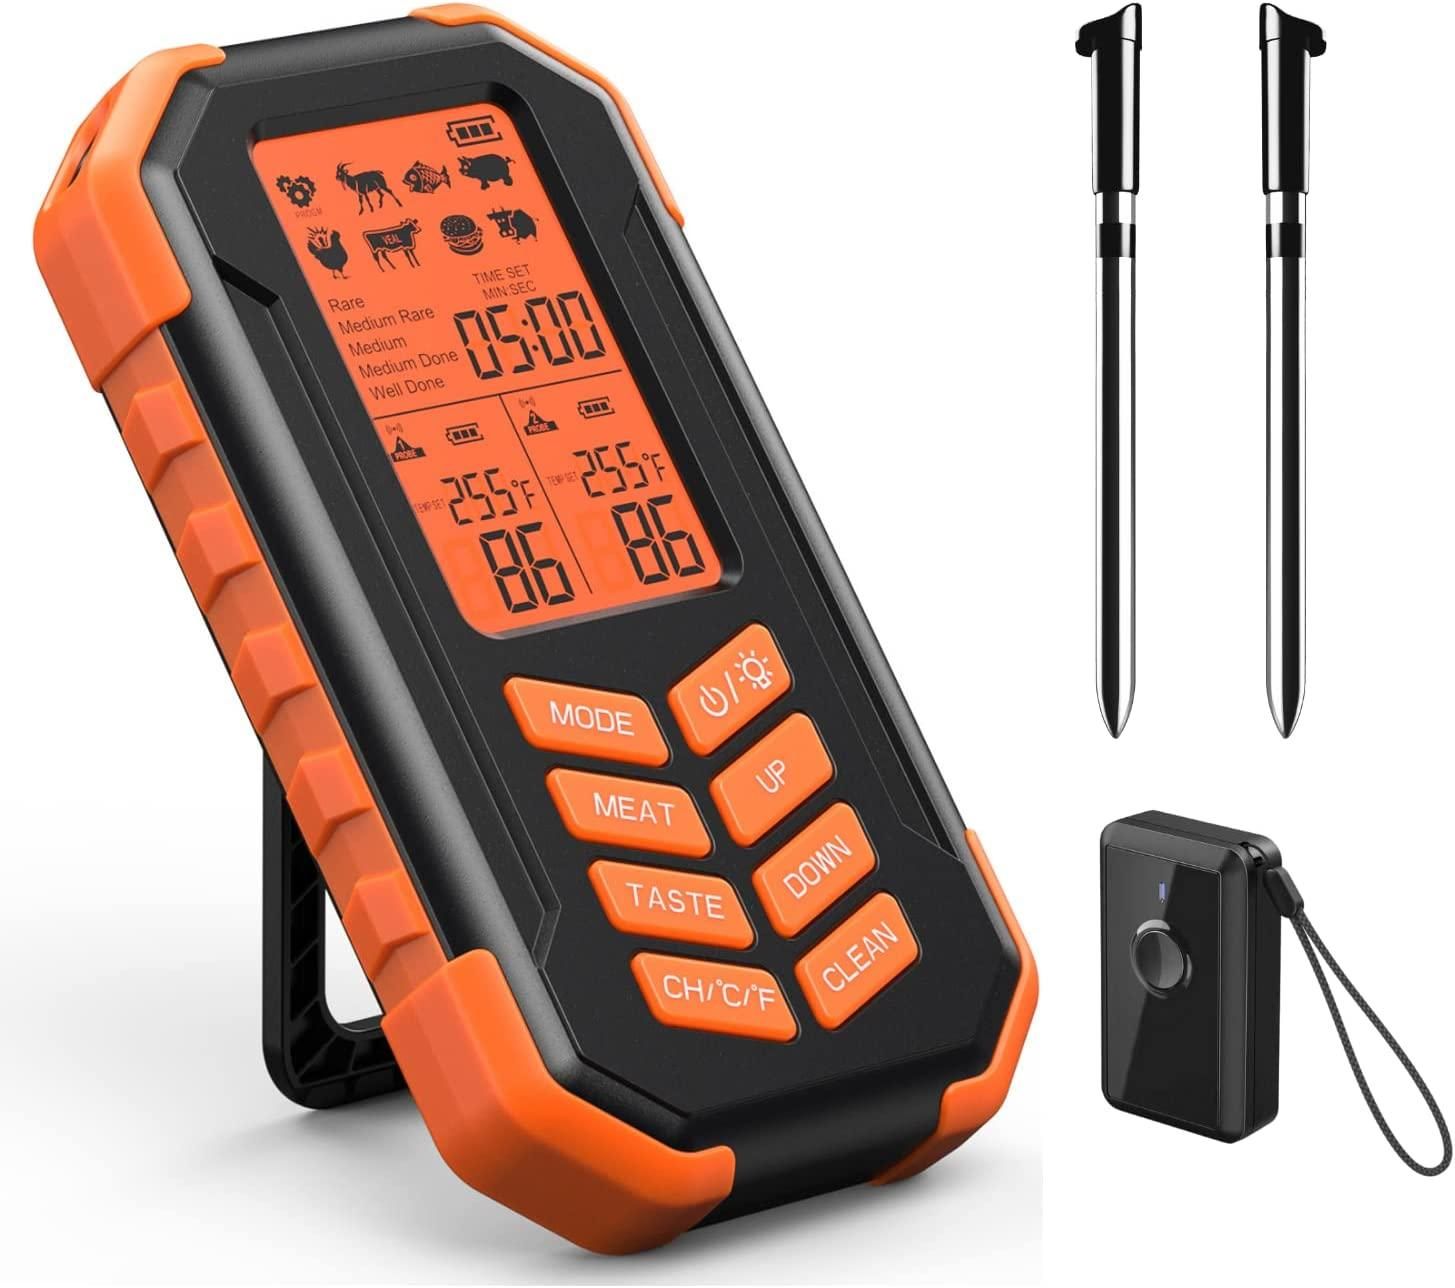 Save 50% on Govee's 4-Probe Wireless Bluetooth Meat Thermometer at